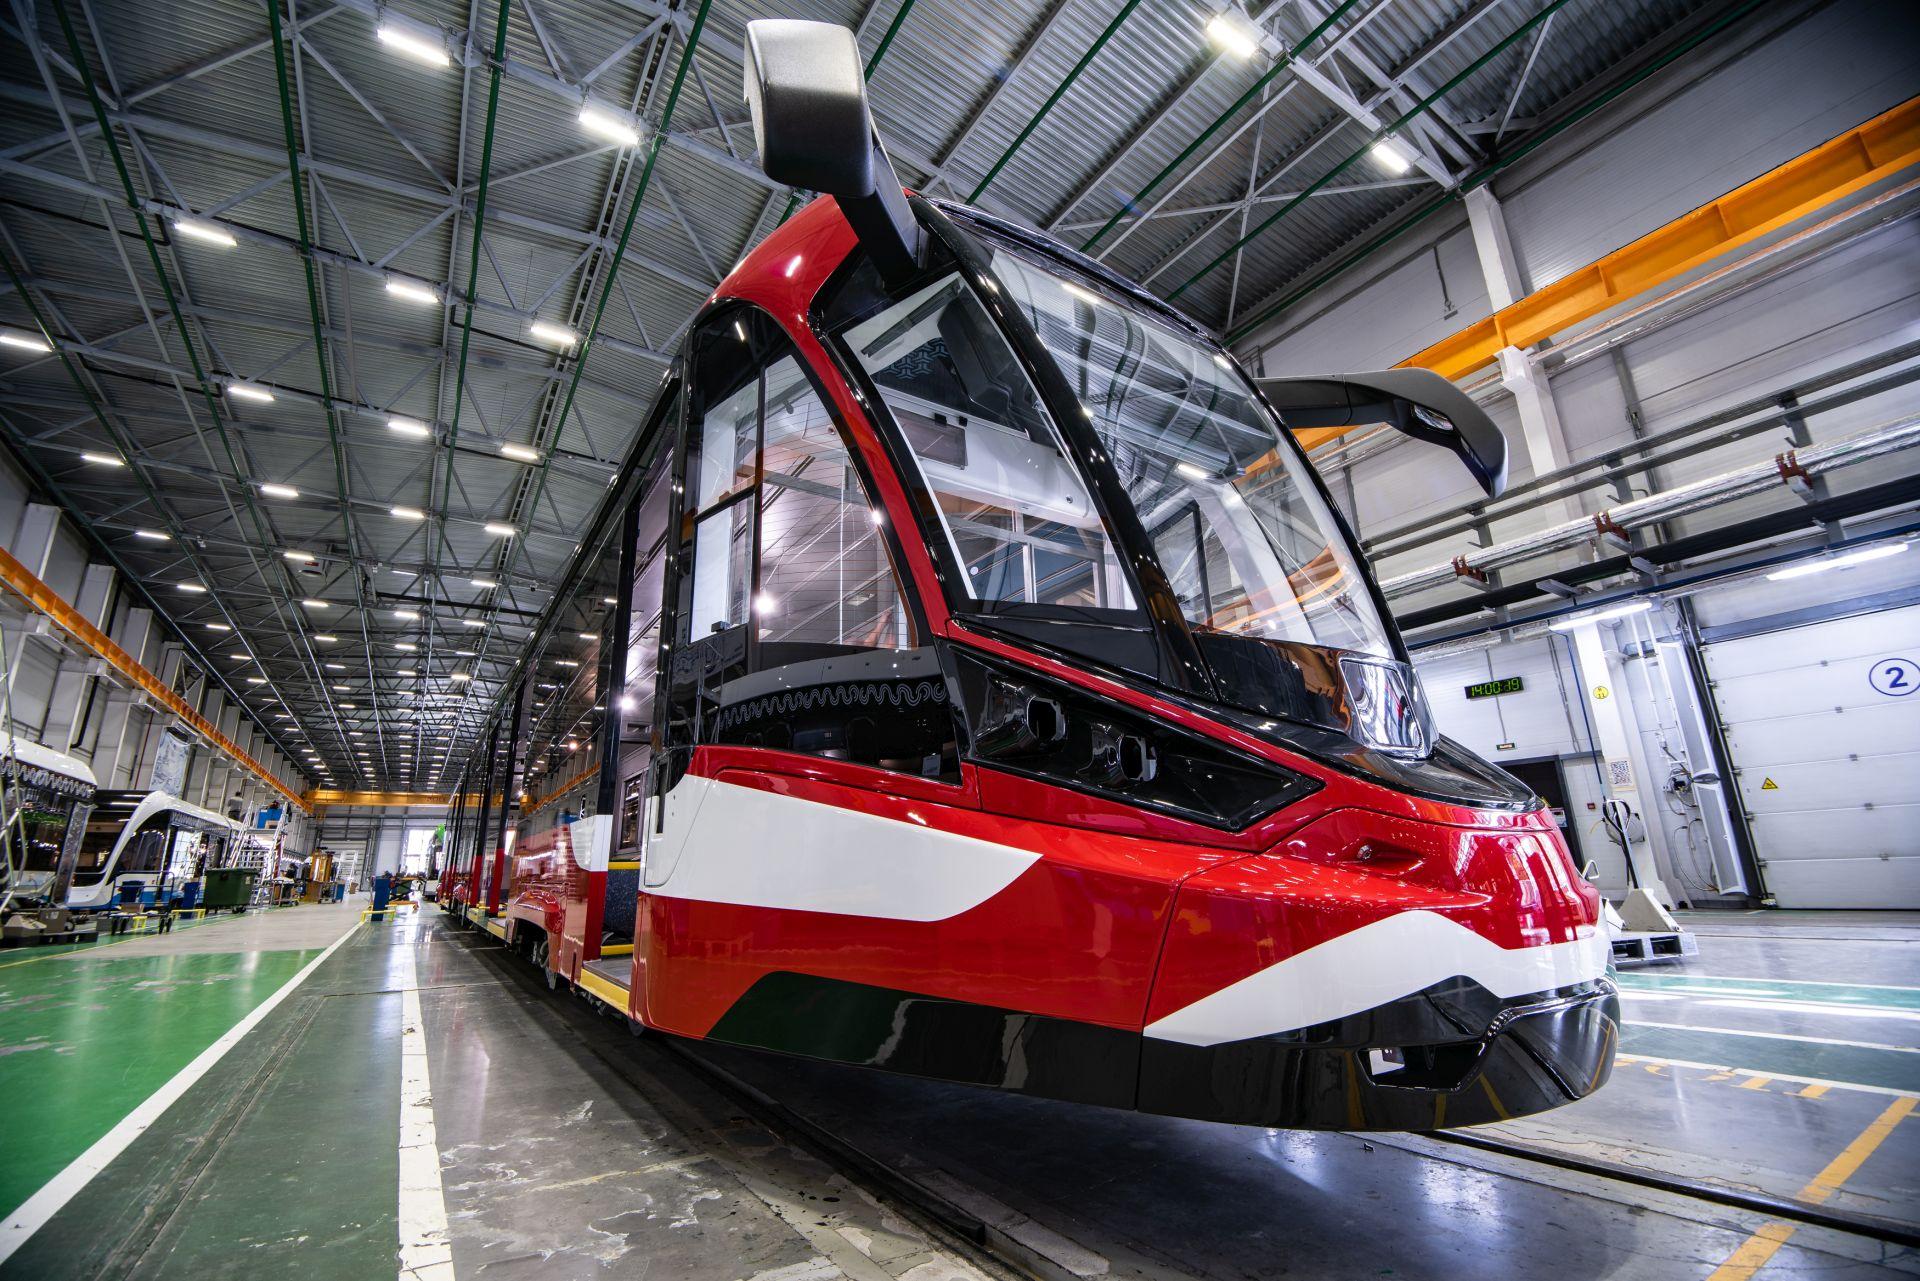 Presentation of the 71-931AM tram by PC TS with an aluminum body